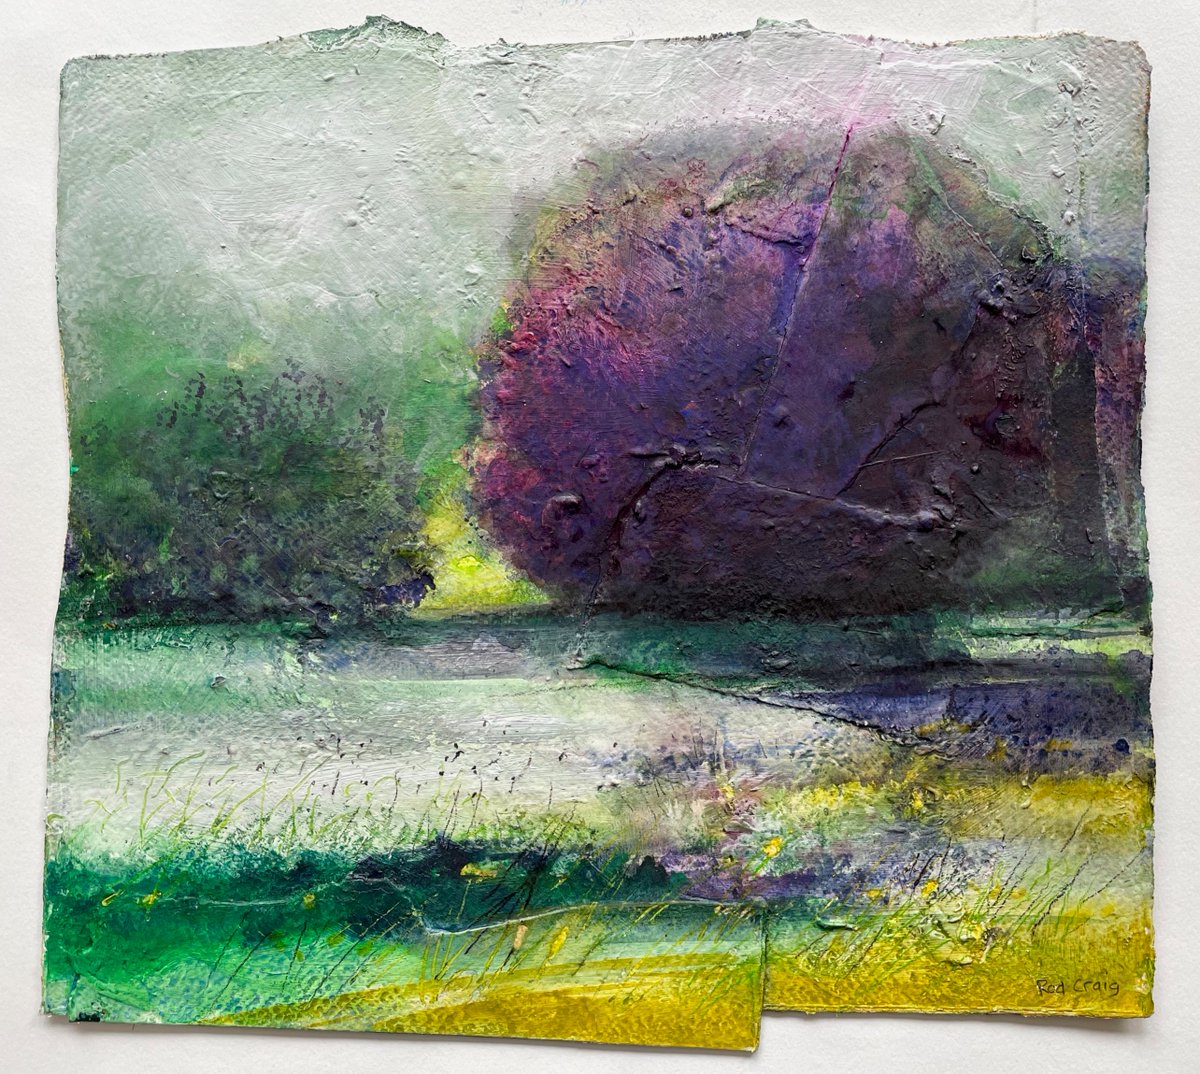 'The Copper Beech' at @BlenheimPalace mixed media on collaged rag paper